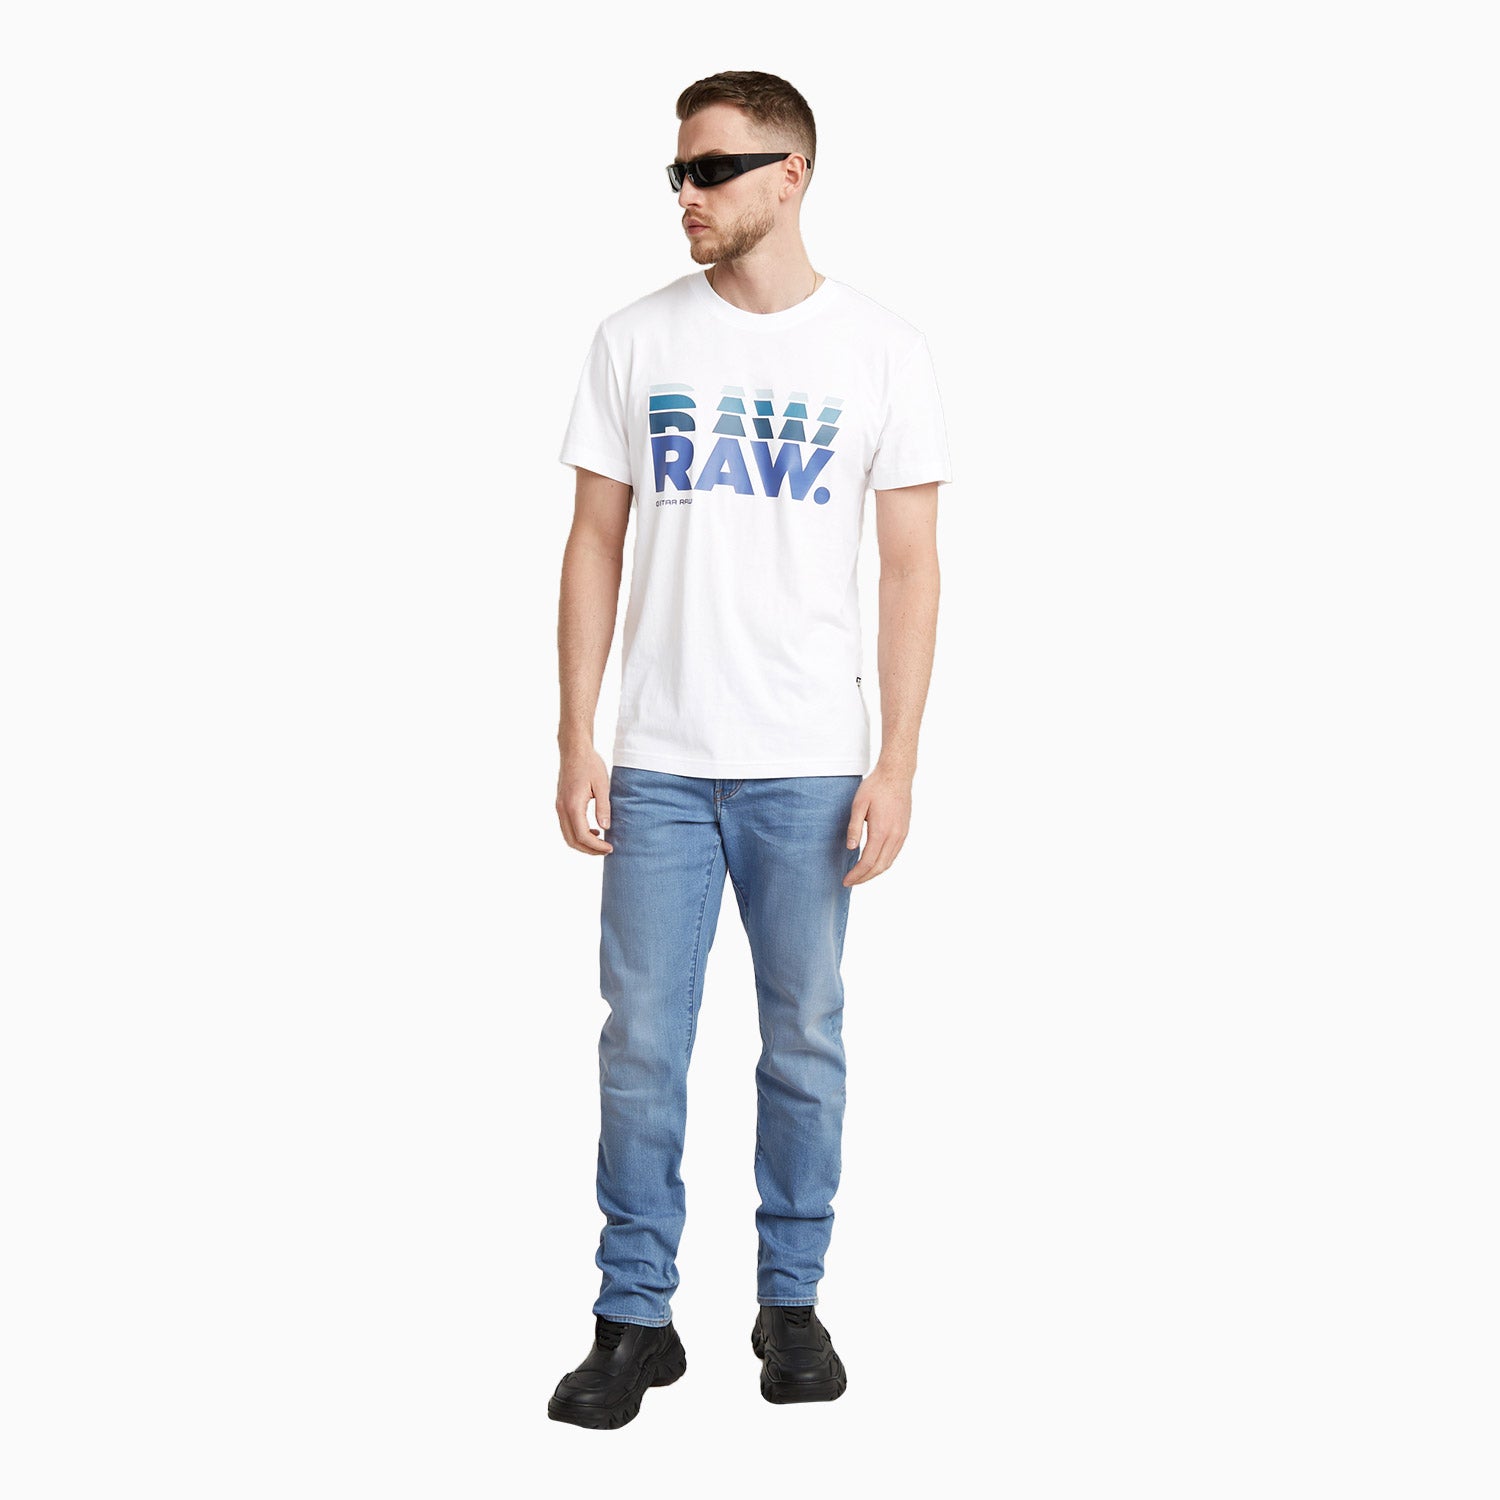 g-star-raw-mens-g-star-graphic-crew-neck-t-shirt-d25497-336-110